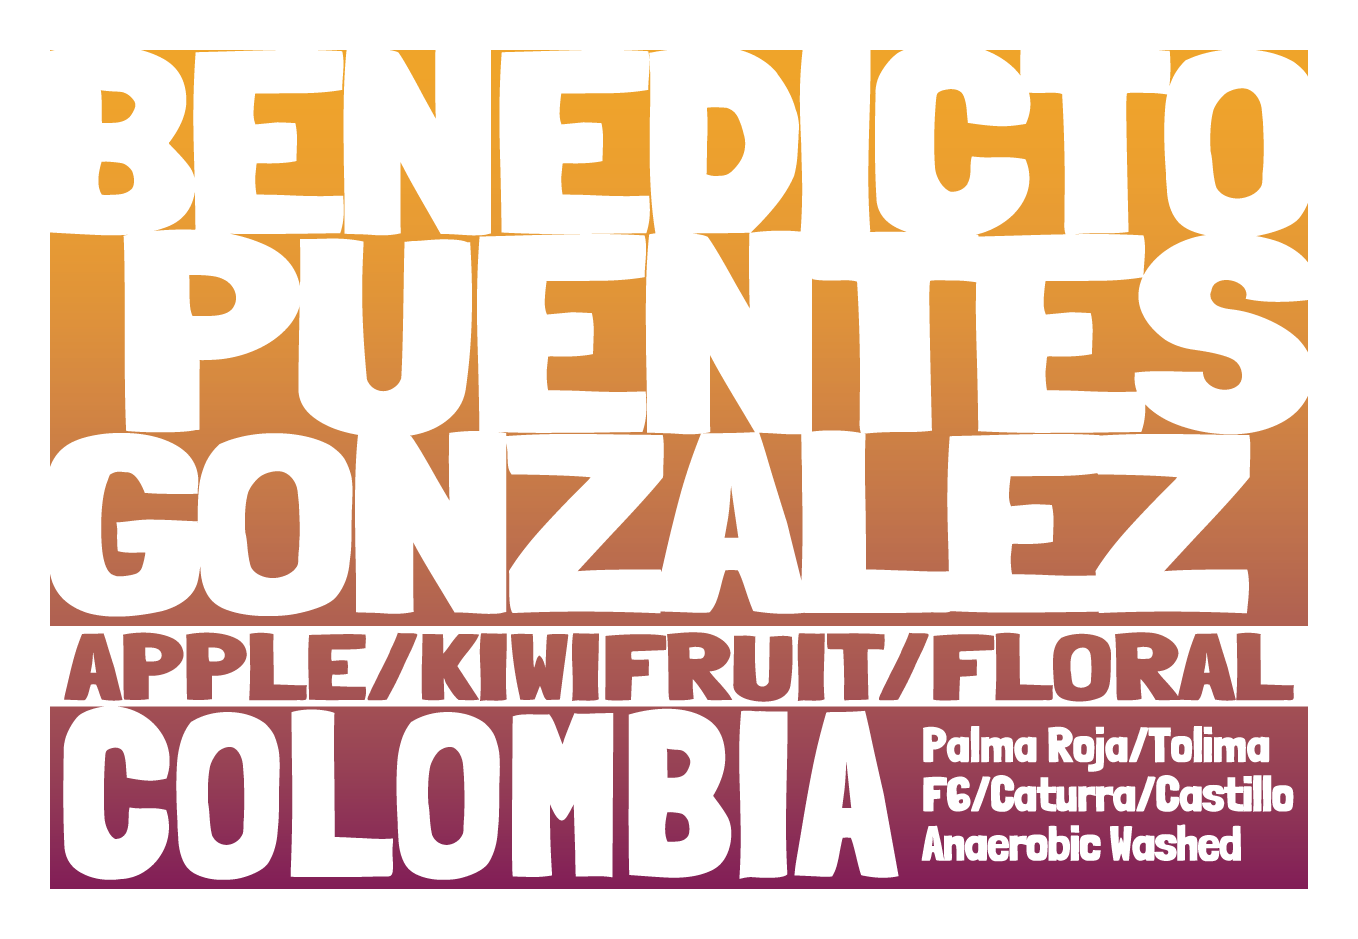 Colombia - Benedicto Peuntes Gonzales - Anaerobic Washed